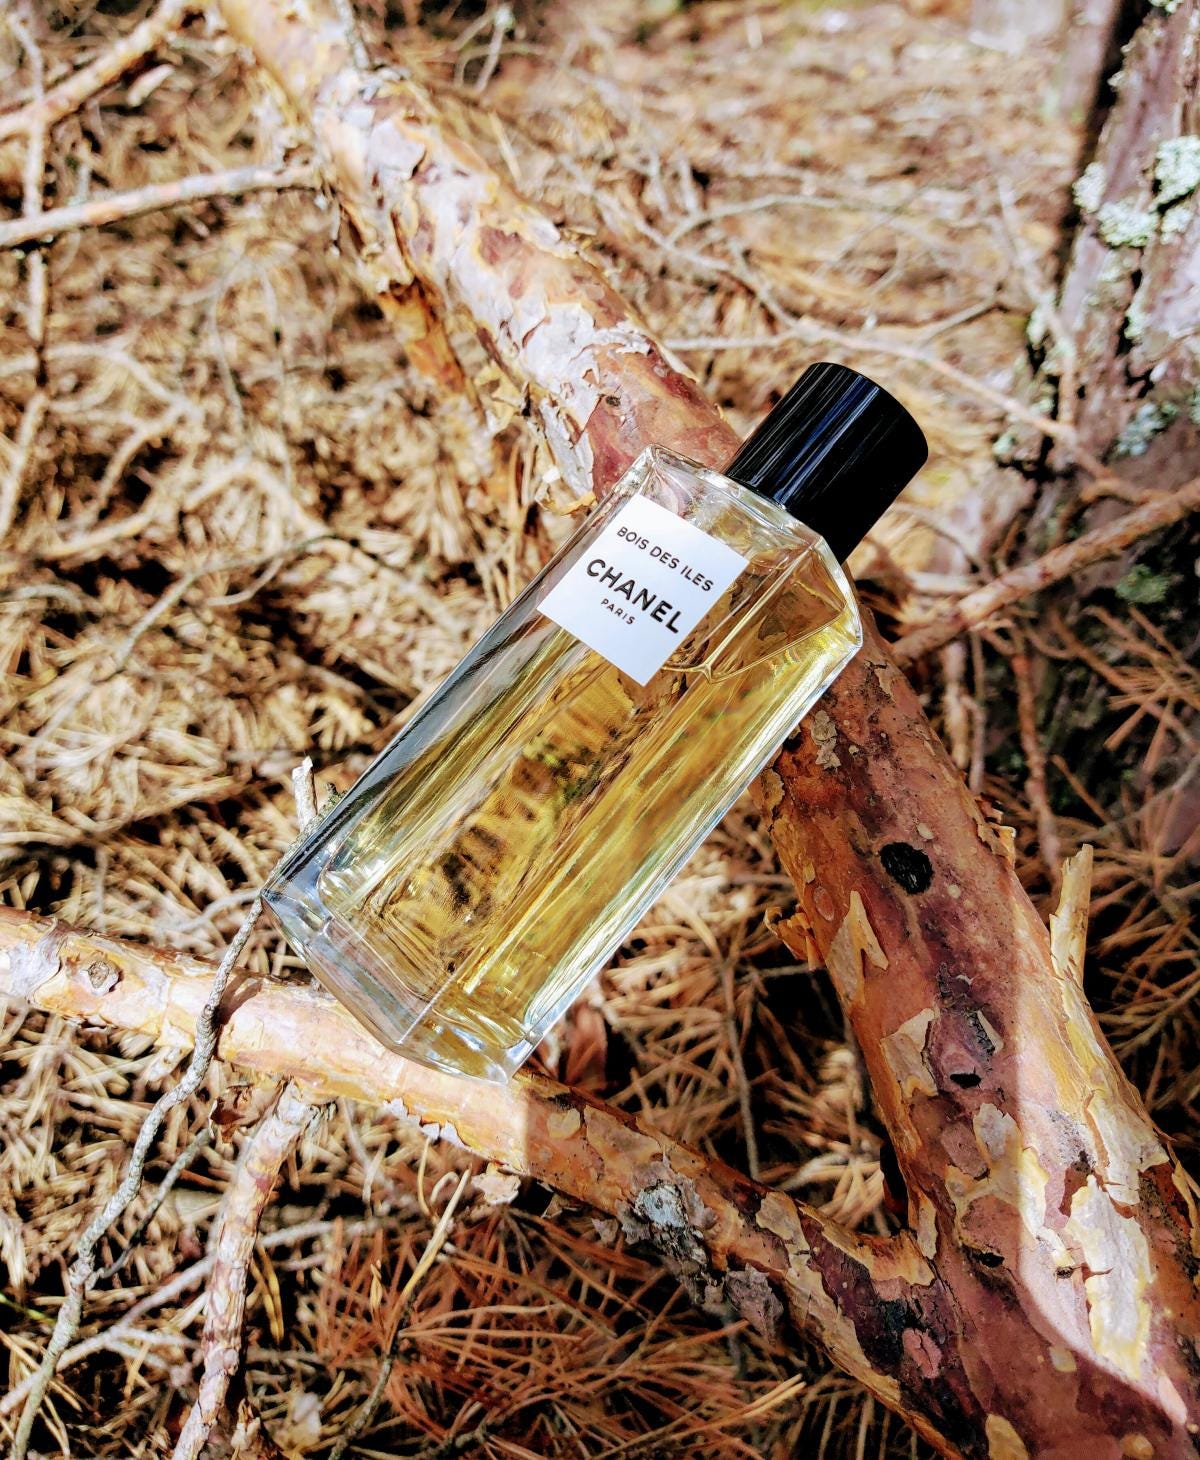 Bois des Iles. To Chanel №5's timeless blonde…, by Erin Lurainey, The  Perfumed Slattern